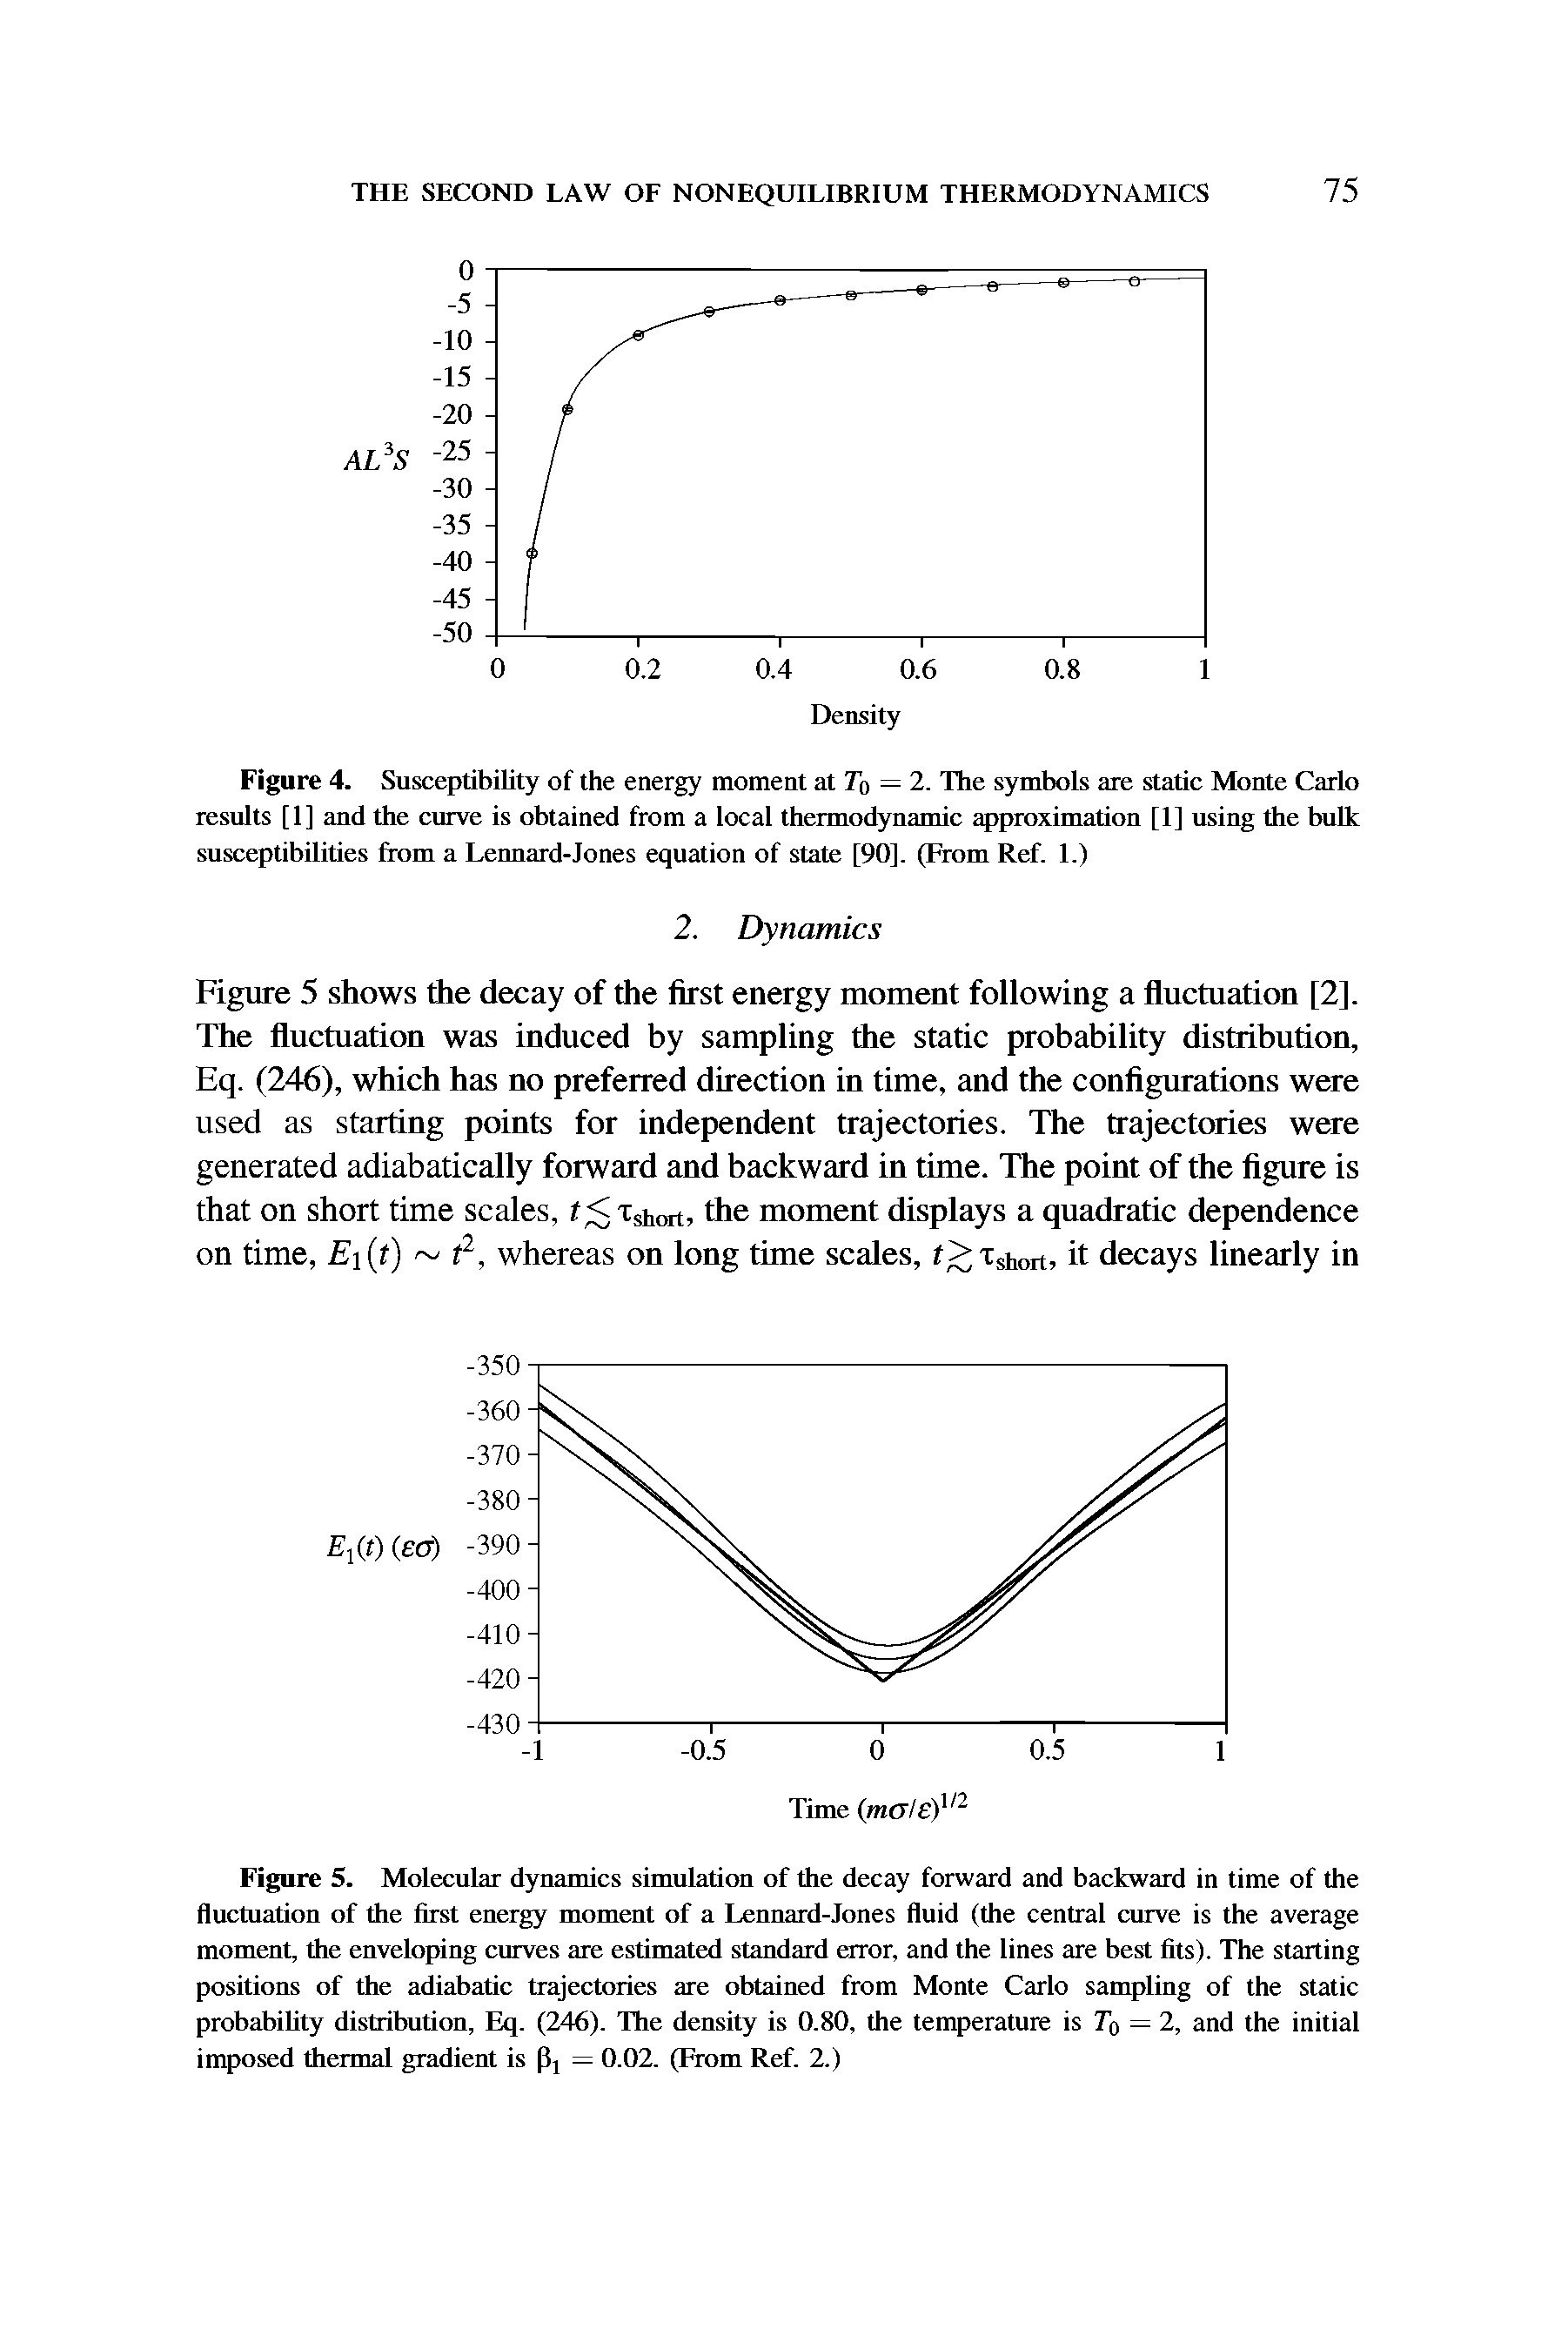 Figure 4. Susceptibility of the energy moment at To — 2. The symbols are static Monte Carlo results [1] and the curve is obtained from a local thermodynamic approximation [1] using the bulk susceptibilities from a Lennard-Jones equation of state [90], (From Ref. 1.)...